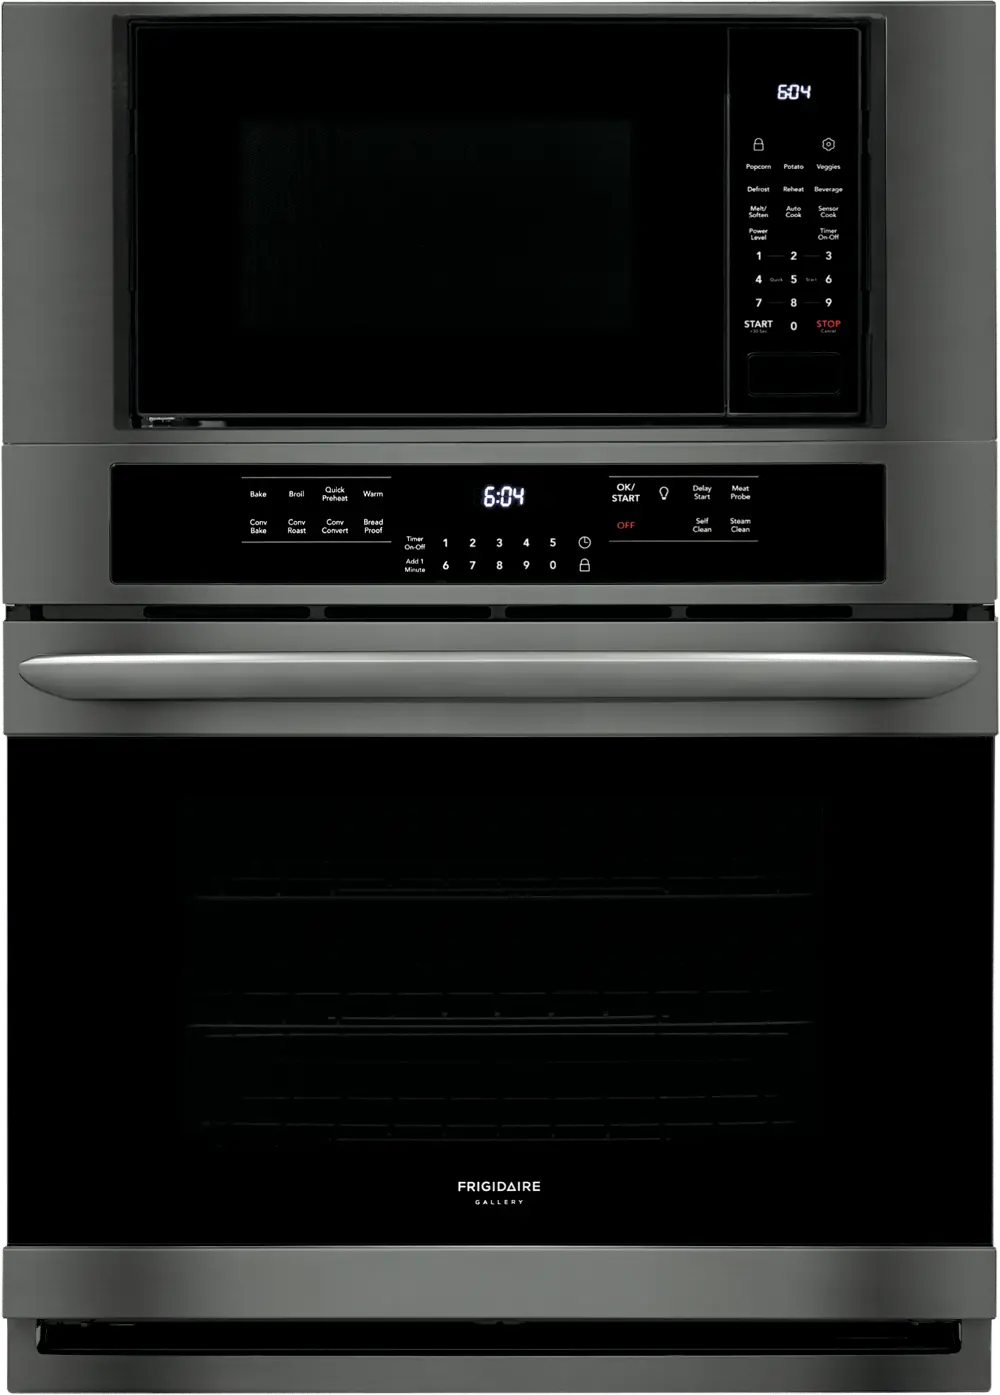 FGMC3066UD Frigidaire Gallery 30 Inch Combination Wall Oven with Microwave - Black Stainless Steel-1